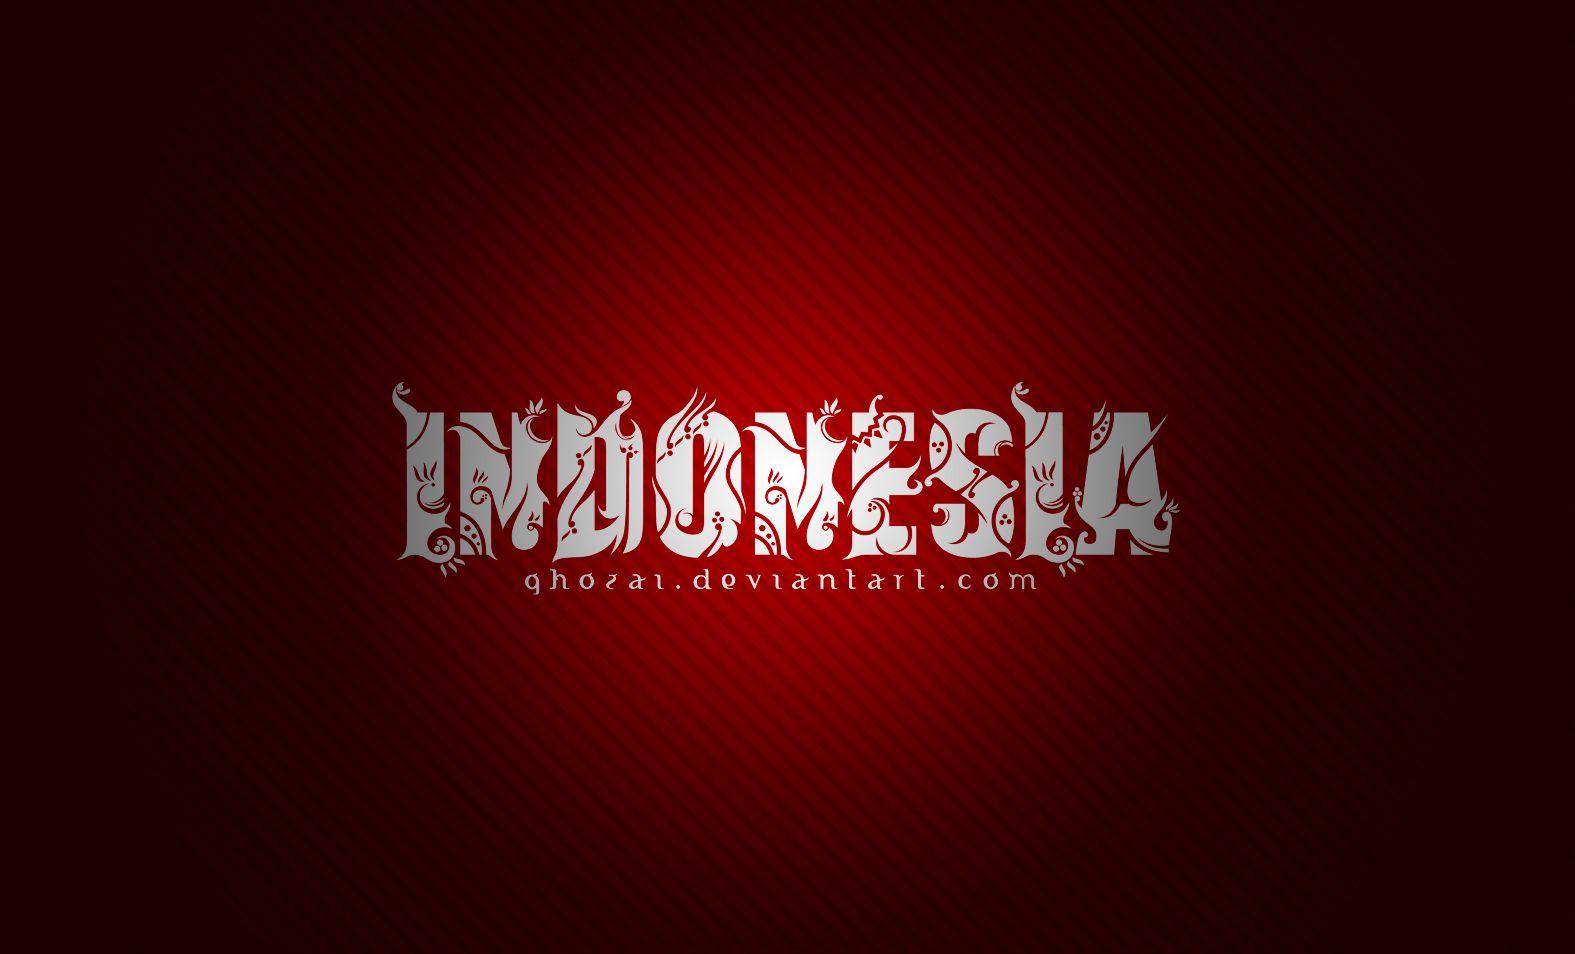 Amazing Indonesia Wallpaper Collection